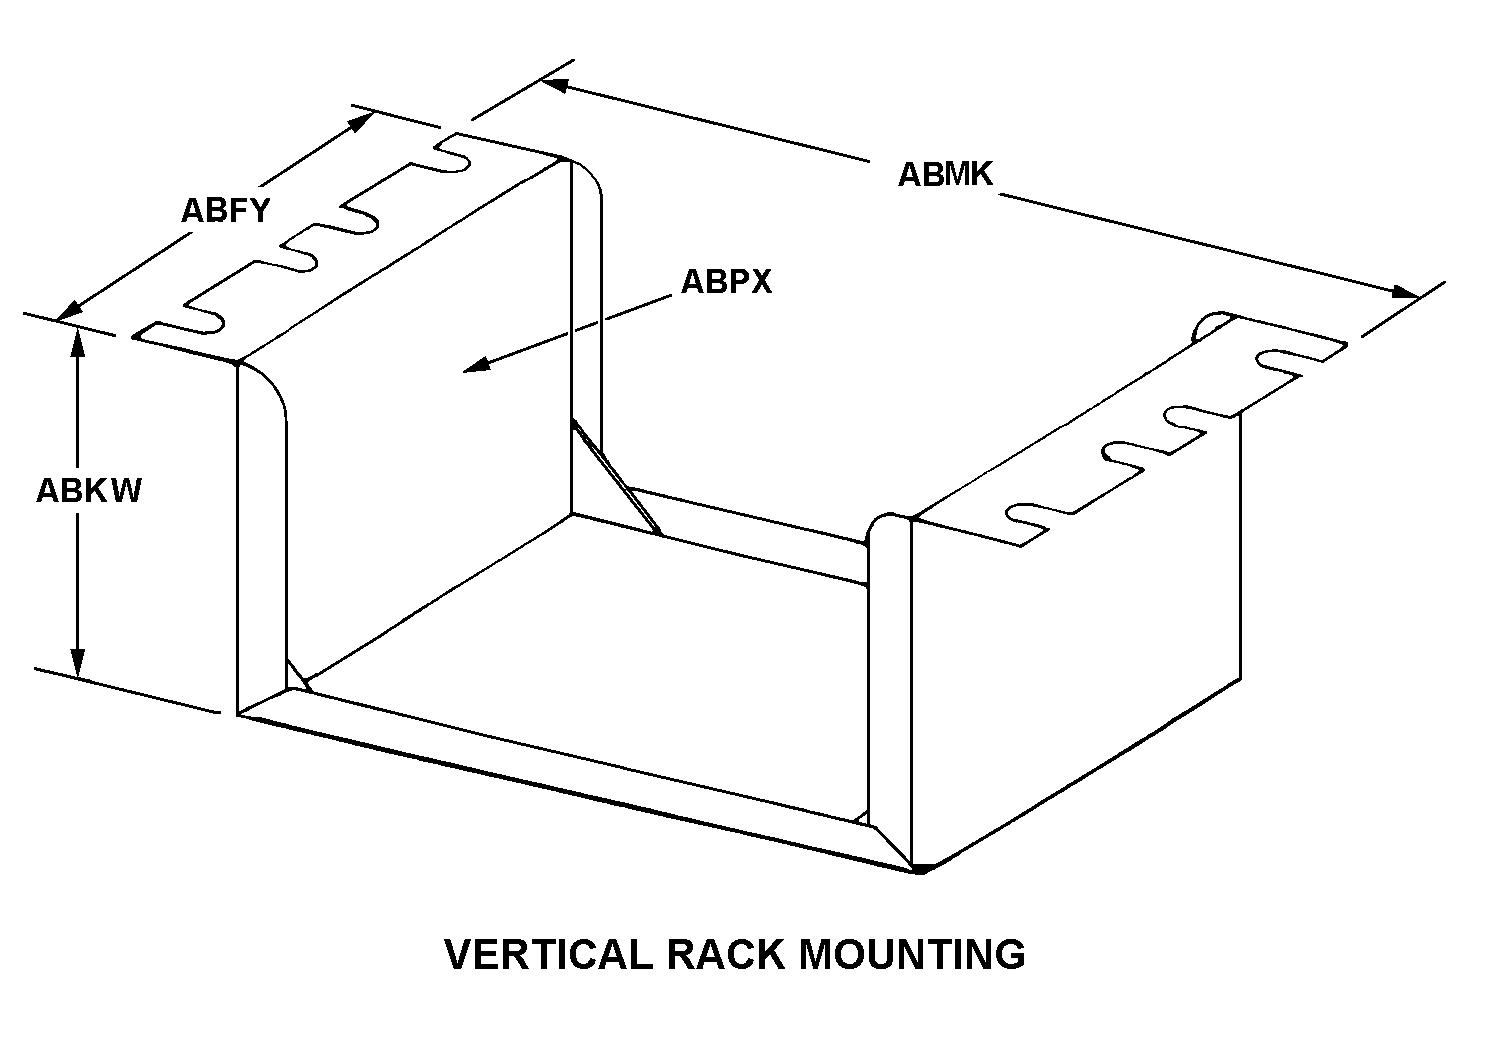 VERTICAL RACK MOUNTING style nsn 5975-01-278-5834